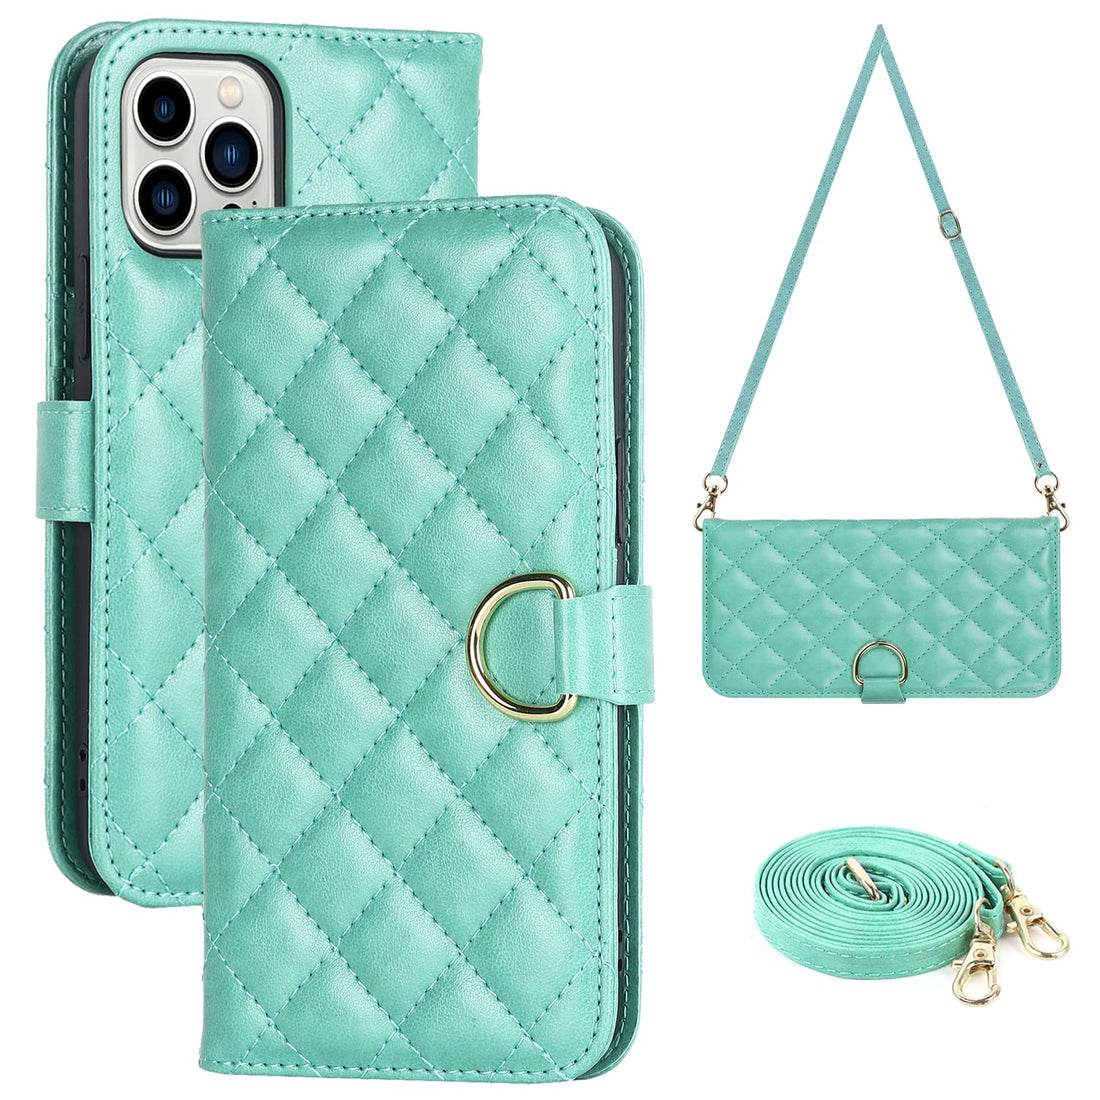 Ｈａｖａｙａ Crossbody Phone case for iPhone 15 pro max case with Strap for Women iPhone 15 pro max case with Card Holder iPhone 15 pro max Wallet case flip Folio Leather Cover-Green